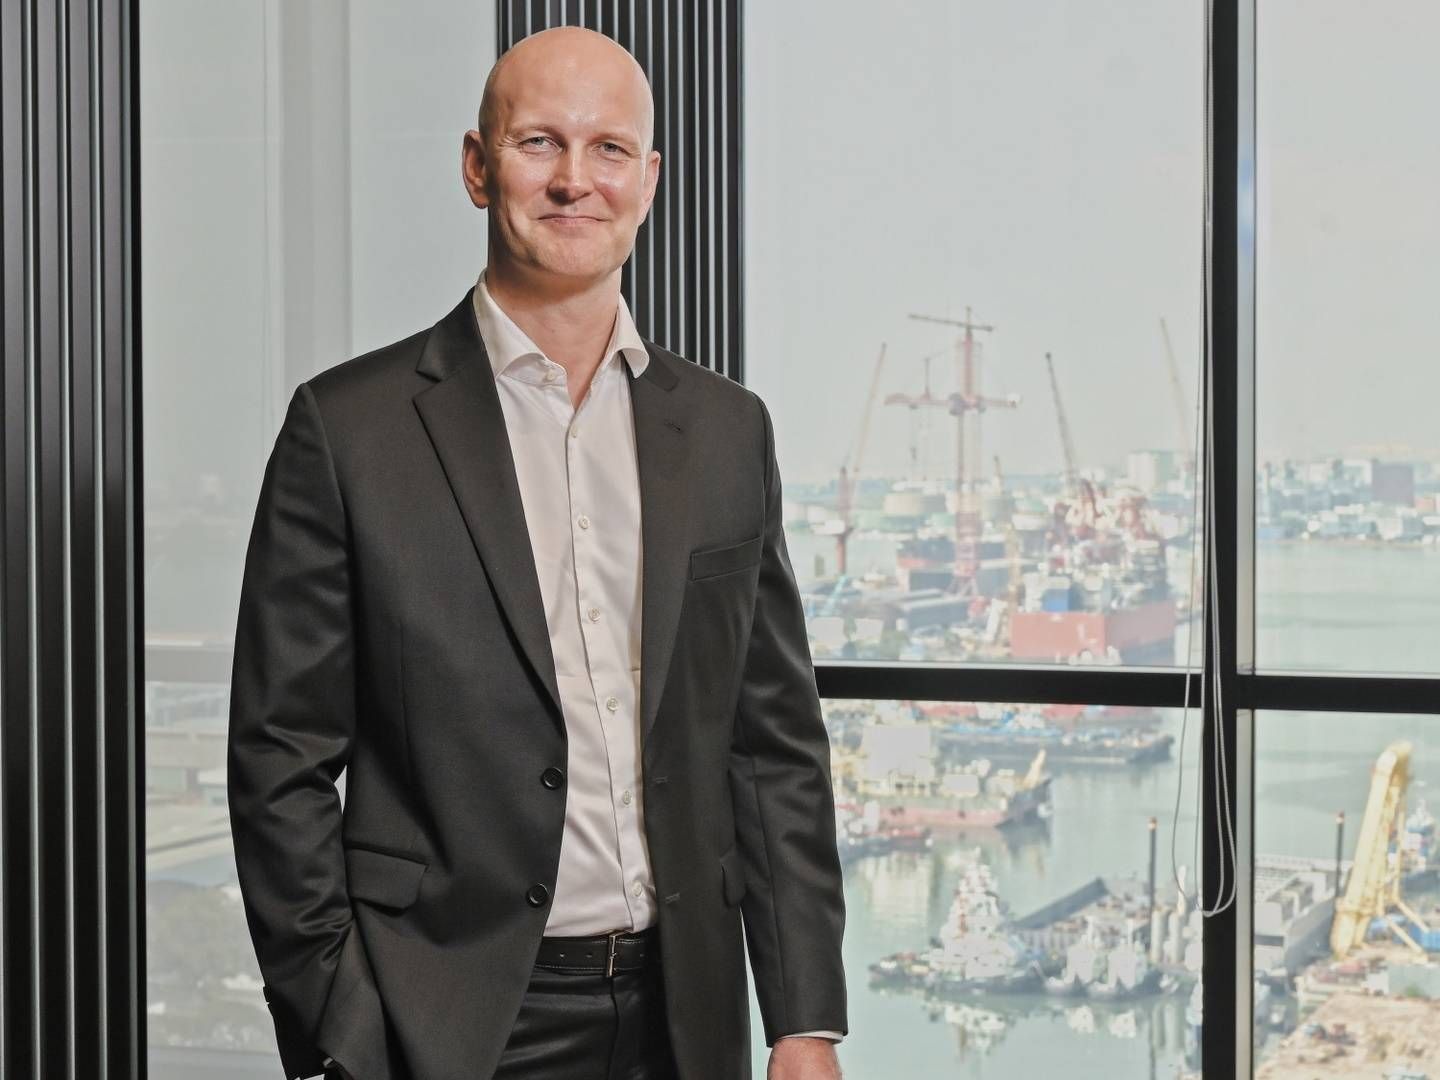 After four years as CEO, Thomas Knudsen is new chair of logistics firm Toll Group. | Photo: Toll Group